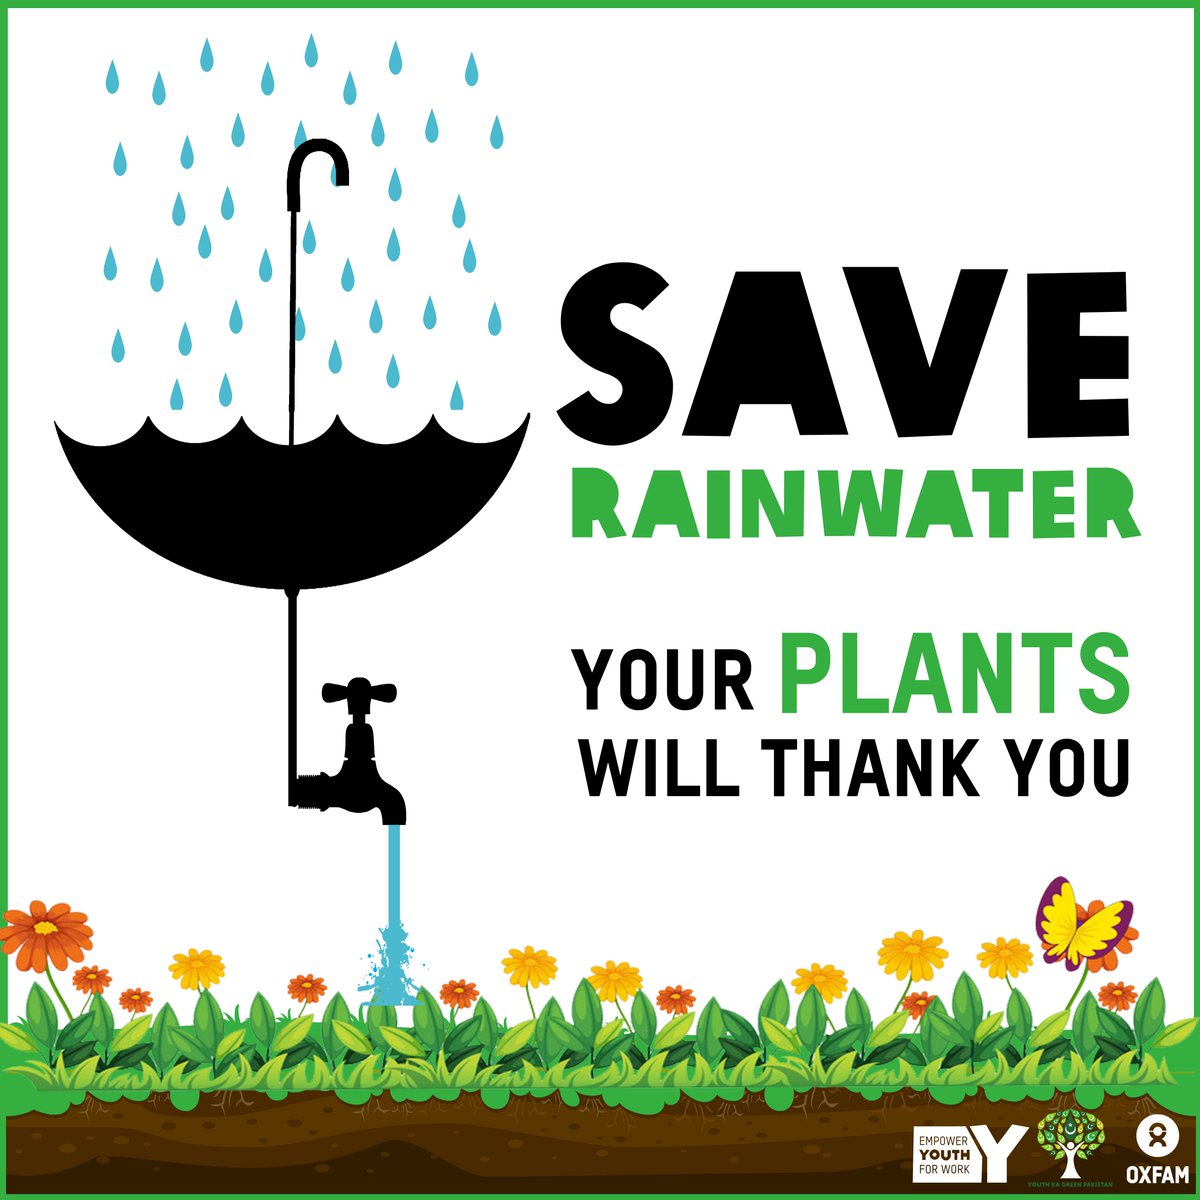 Use rainwater for your plants to save water. Using water barrels in your home saves up to 5,000 litres of water a year . #SafeSpaces4Youth #YouthKaGreenPakistan #SaveWater